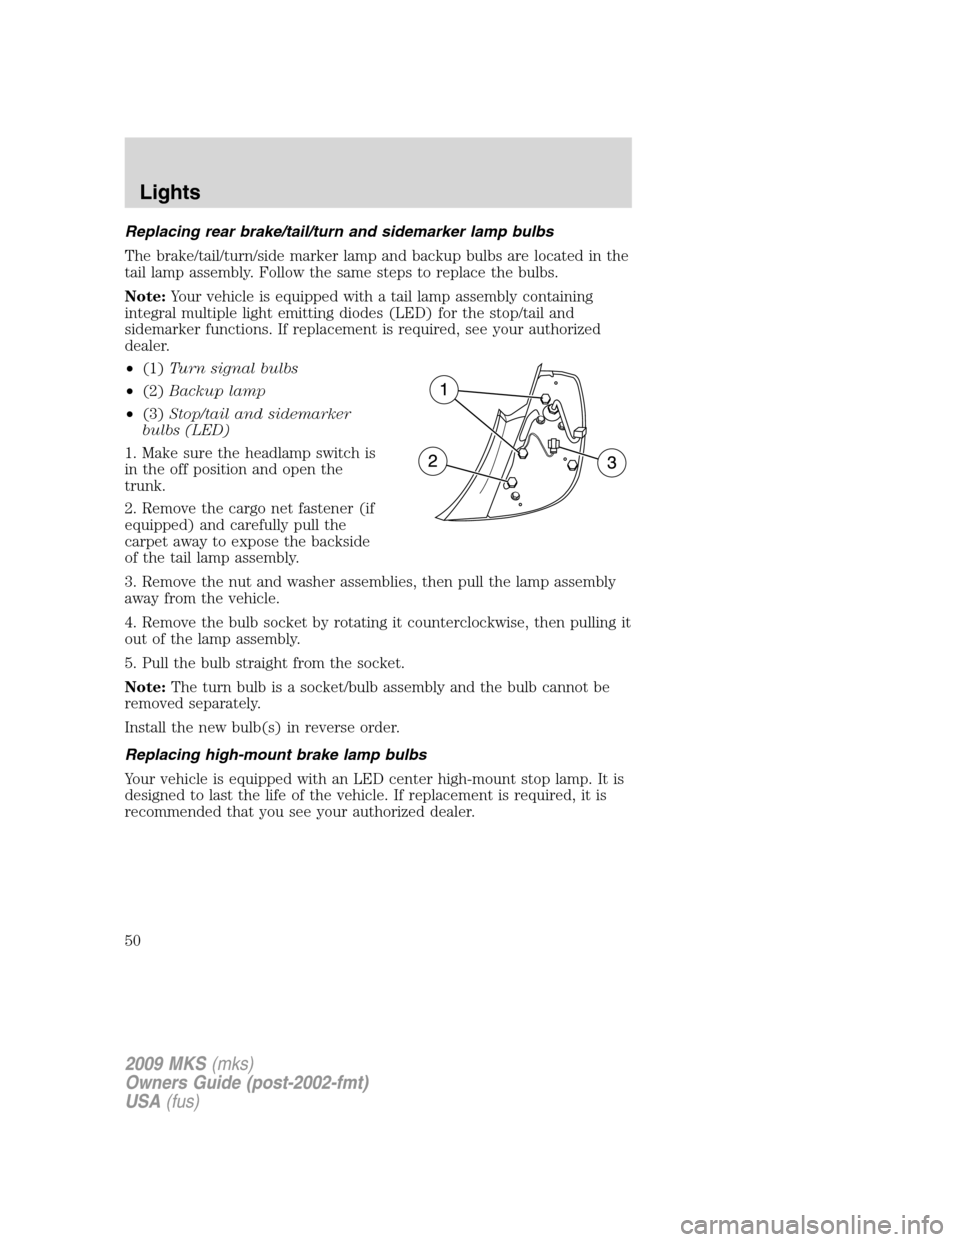 LINCOLN MKS 2009  Owners Manual Replacing rear brake/tail/turn and sidemarker lamp bulbs
The brake/tail/turn/side marker lamp and backup bulbs are located in the
tail lamp assembly. Follow the same steps to replace the bulbs.
Note:Y